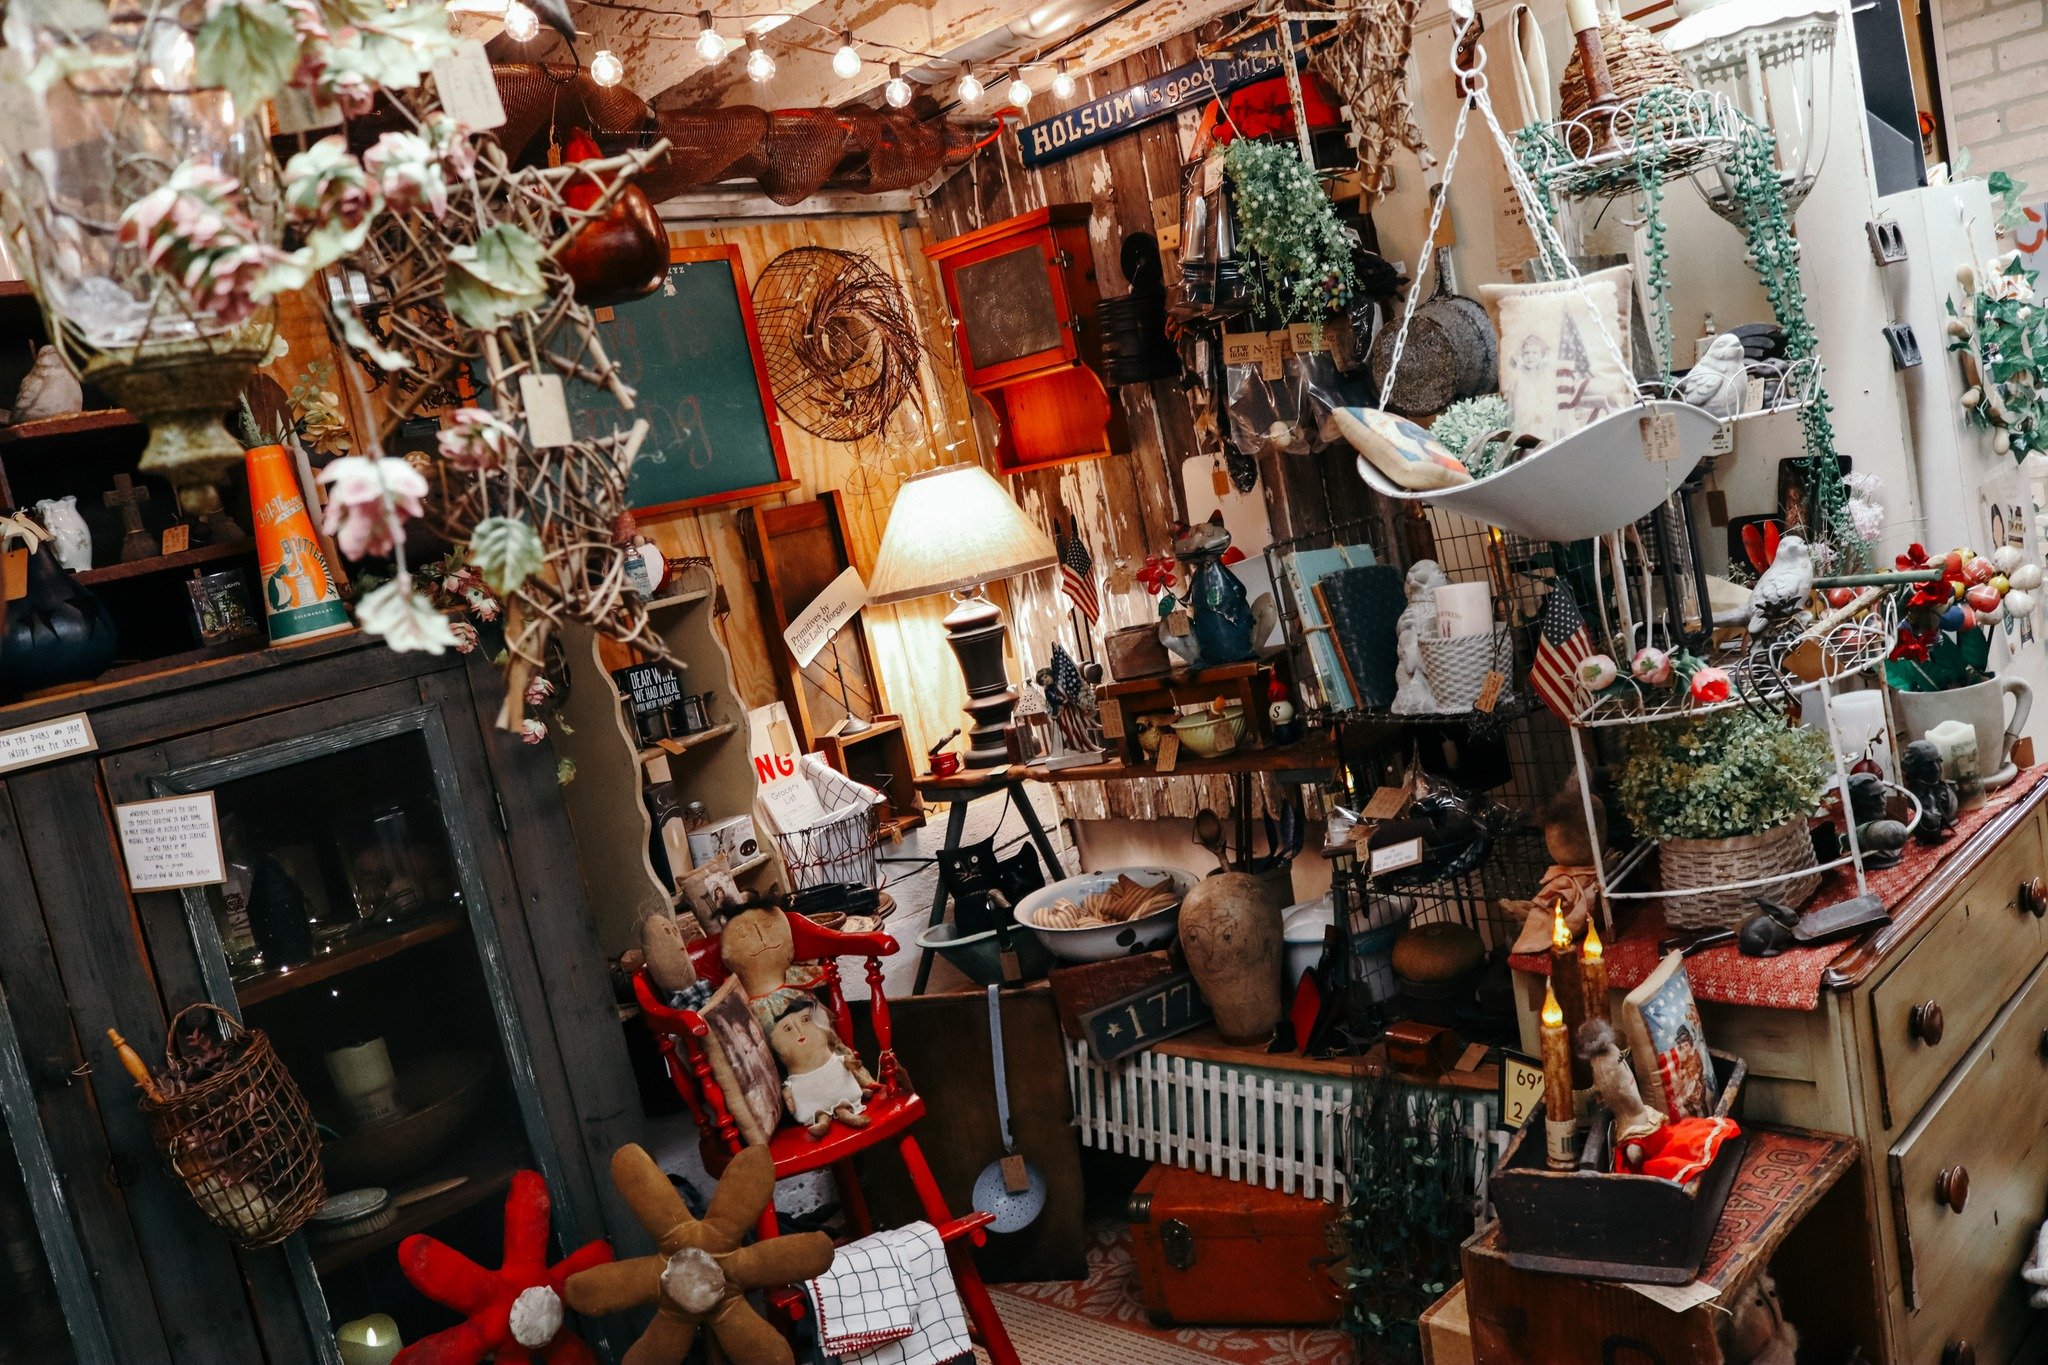 COME DISCOVER PRIMITIVES AND ANTIQUES!

There is no shortage of classic and unique items at @prestigecreativemarkets! Stop in and browse our selection of antique furniture, metal signs, lanterns, primitive dolls, and more. We open tomorrow at 10AM!

